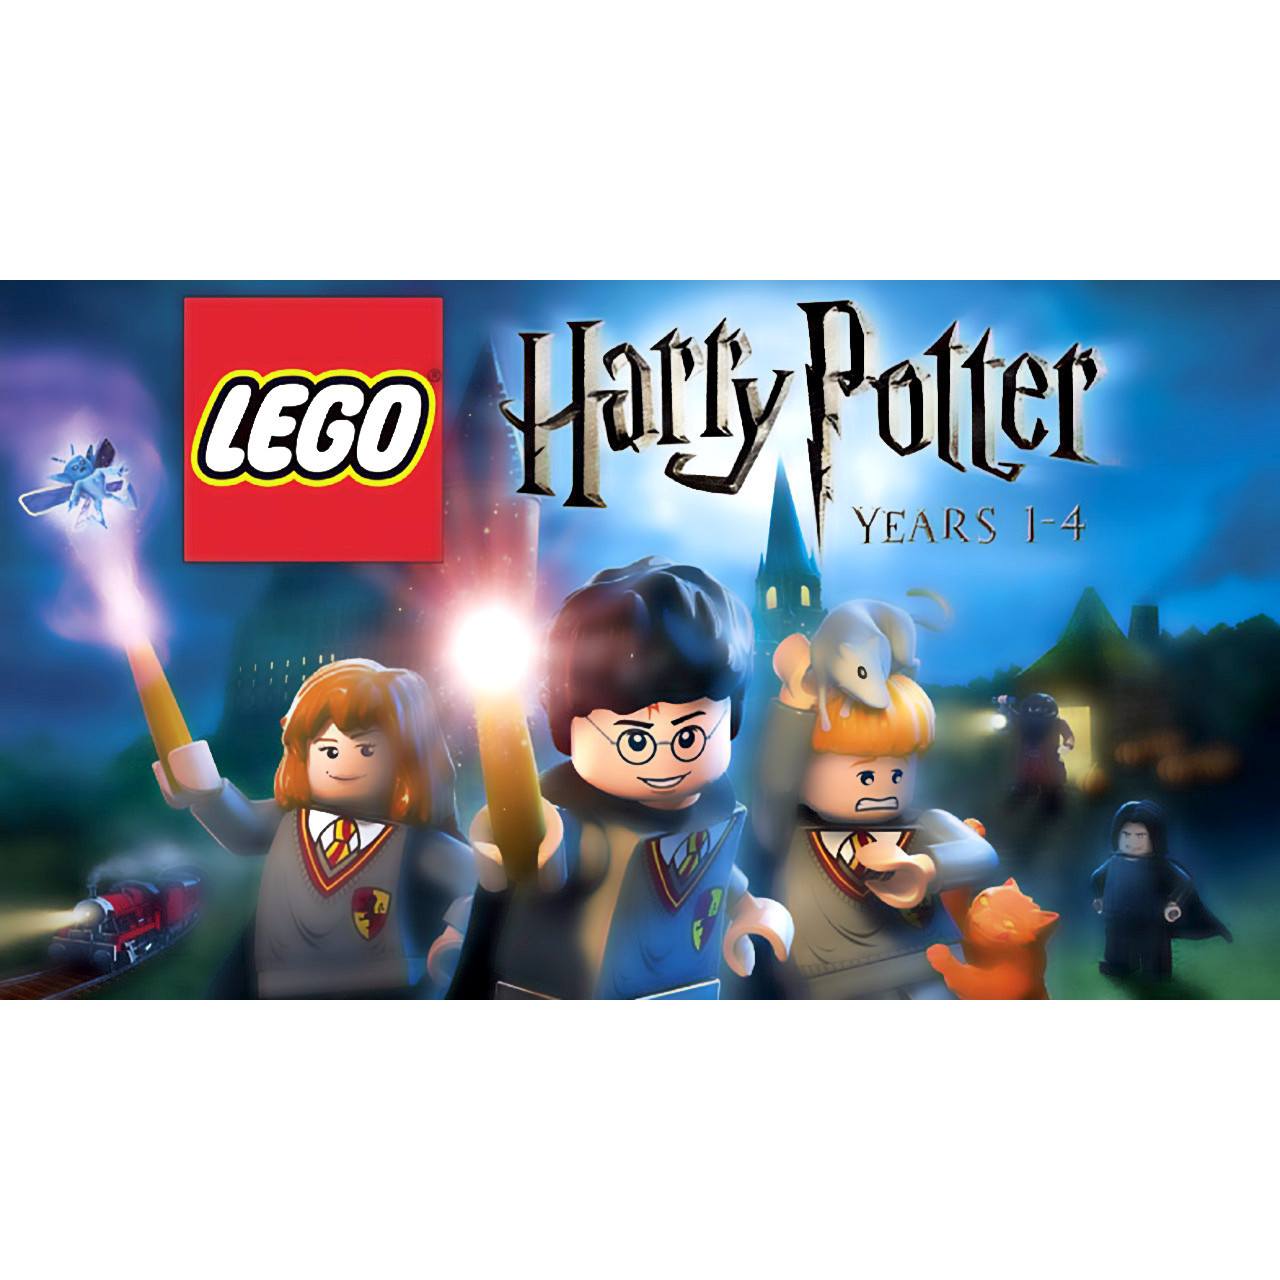 Lego Harry Potter [ Years 1-4 ] (DS) USED